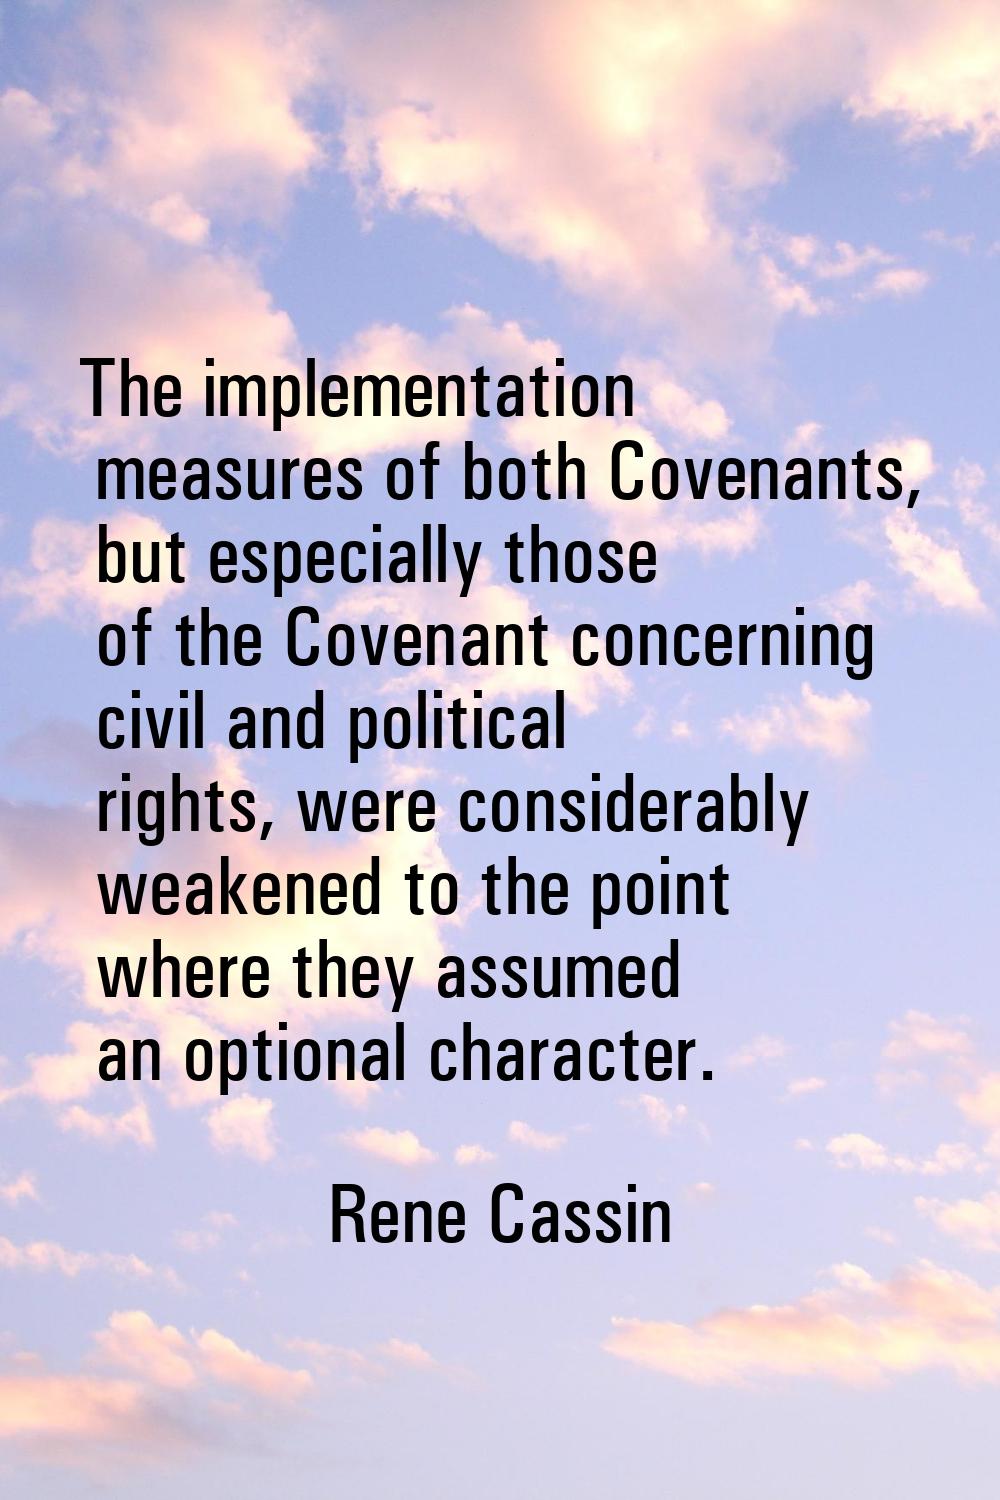 The implementation measures of both Covenants, but especially those of the Covenant concerning civi